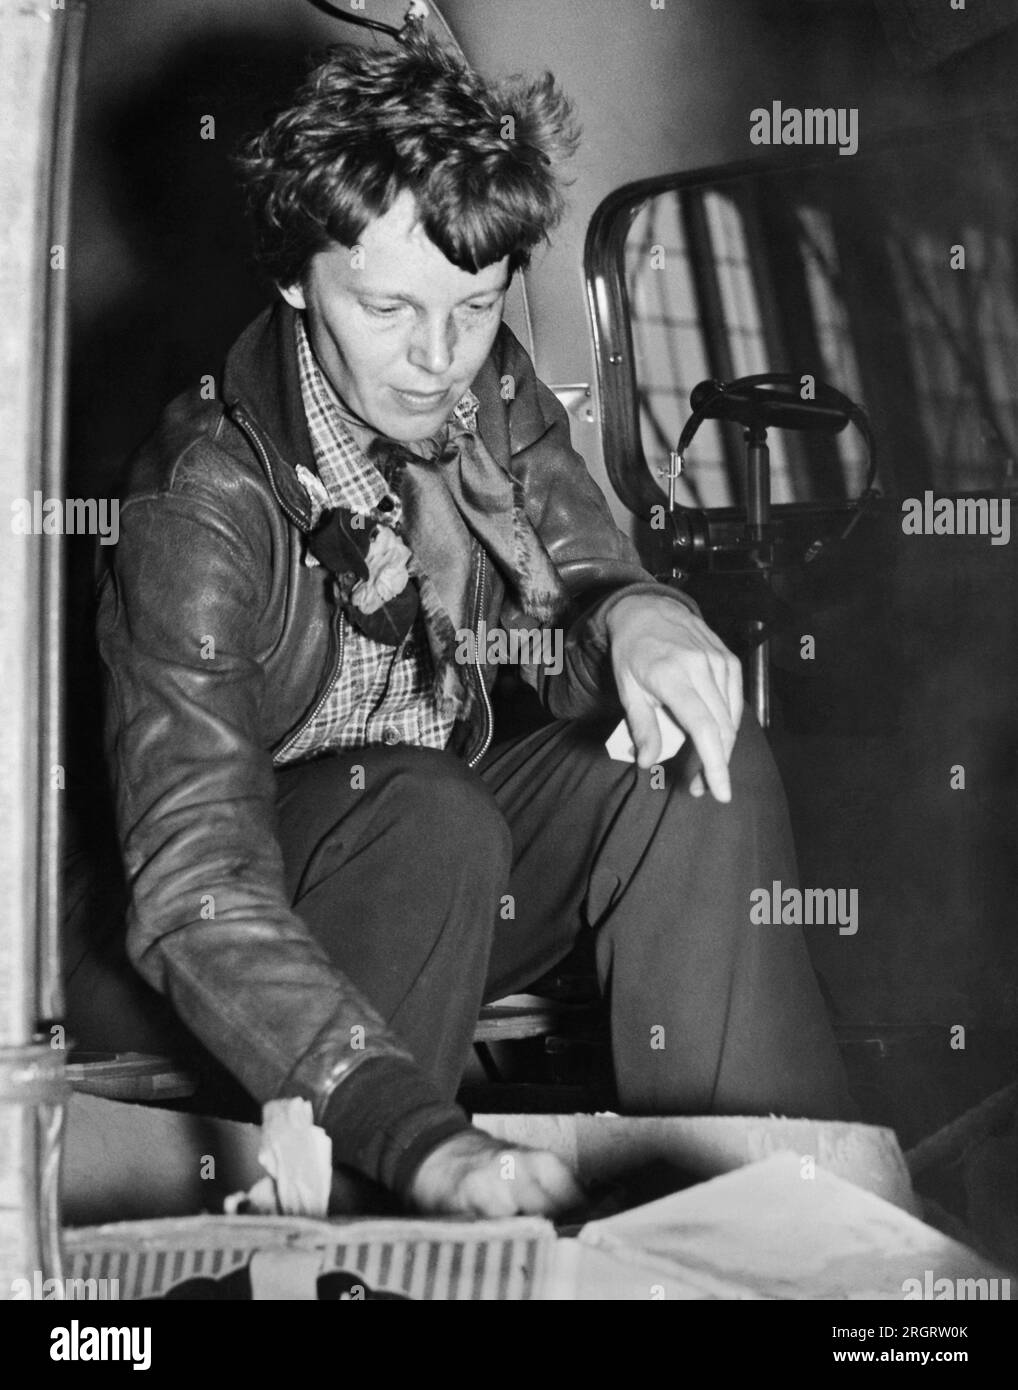 Oakland, California:  March 14, 1937 Aviatrix Amelia Earhart checks her cockpit supplies for her departure to Honolulu on the first leg of her globe circling flight. Stock Photo